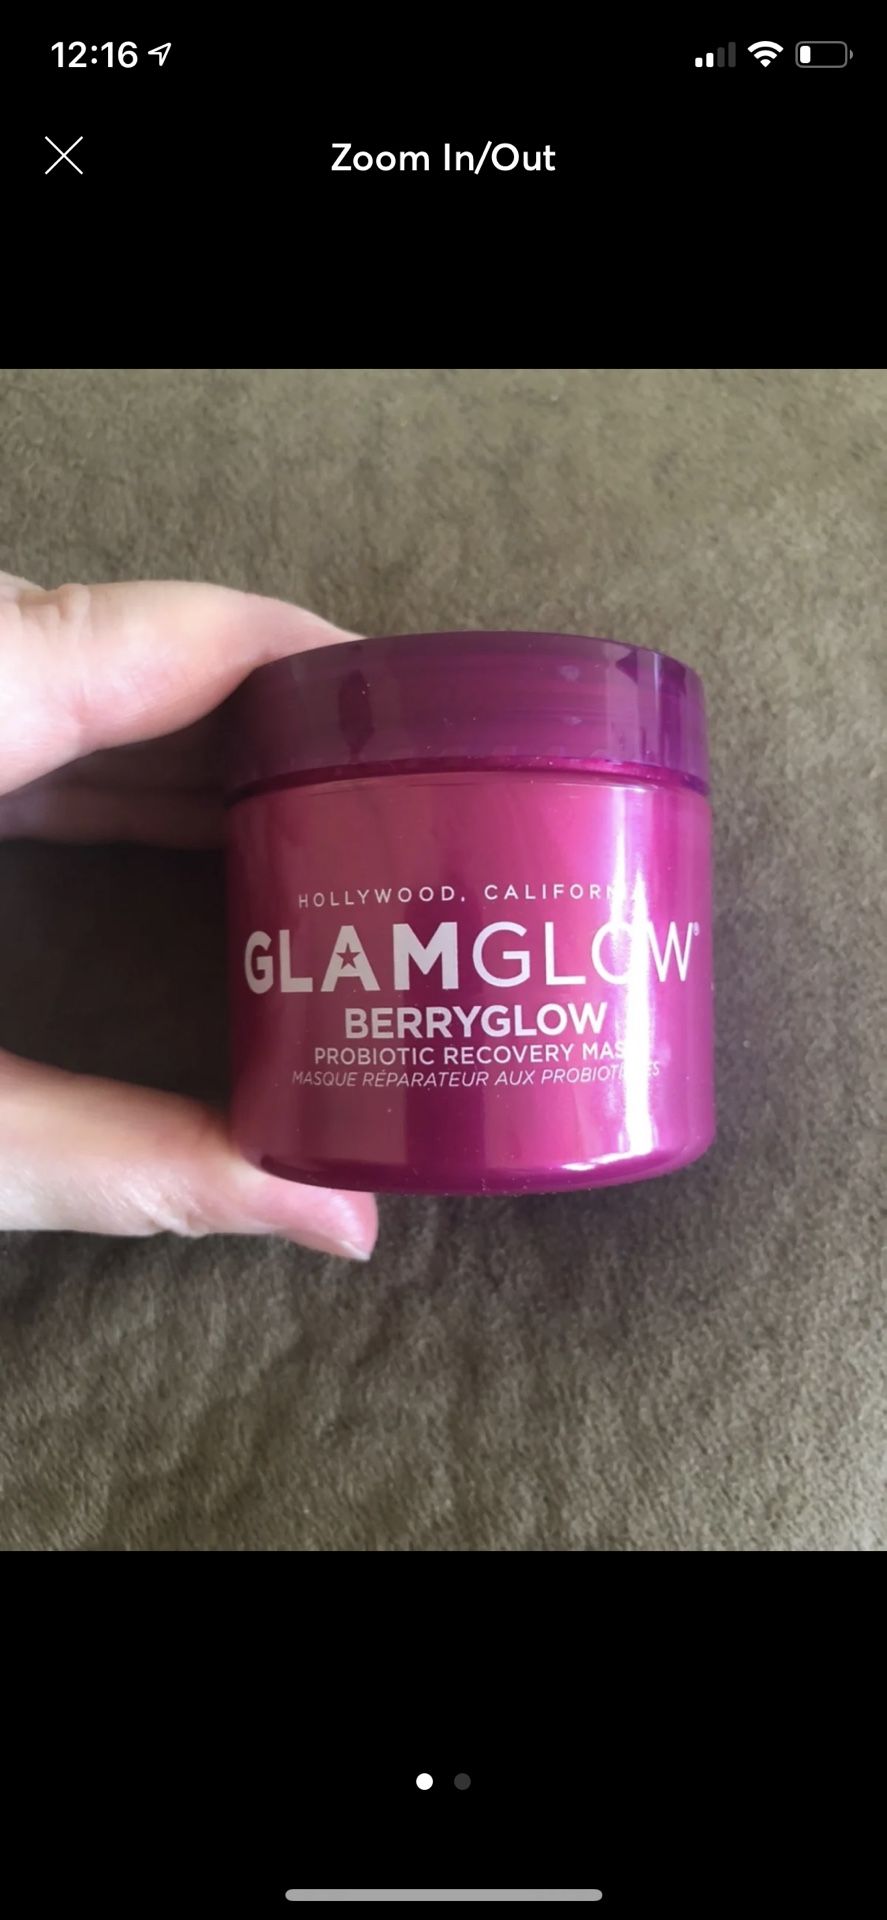 GlamGlow Berry face mask